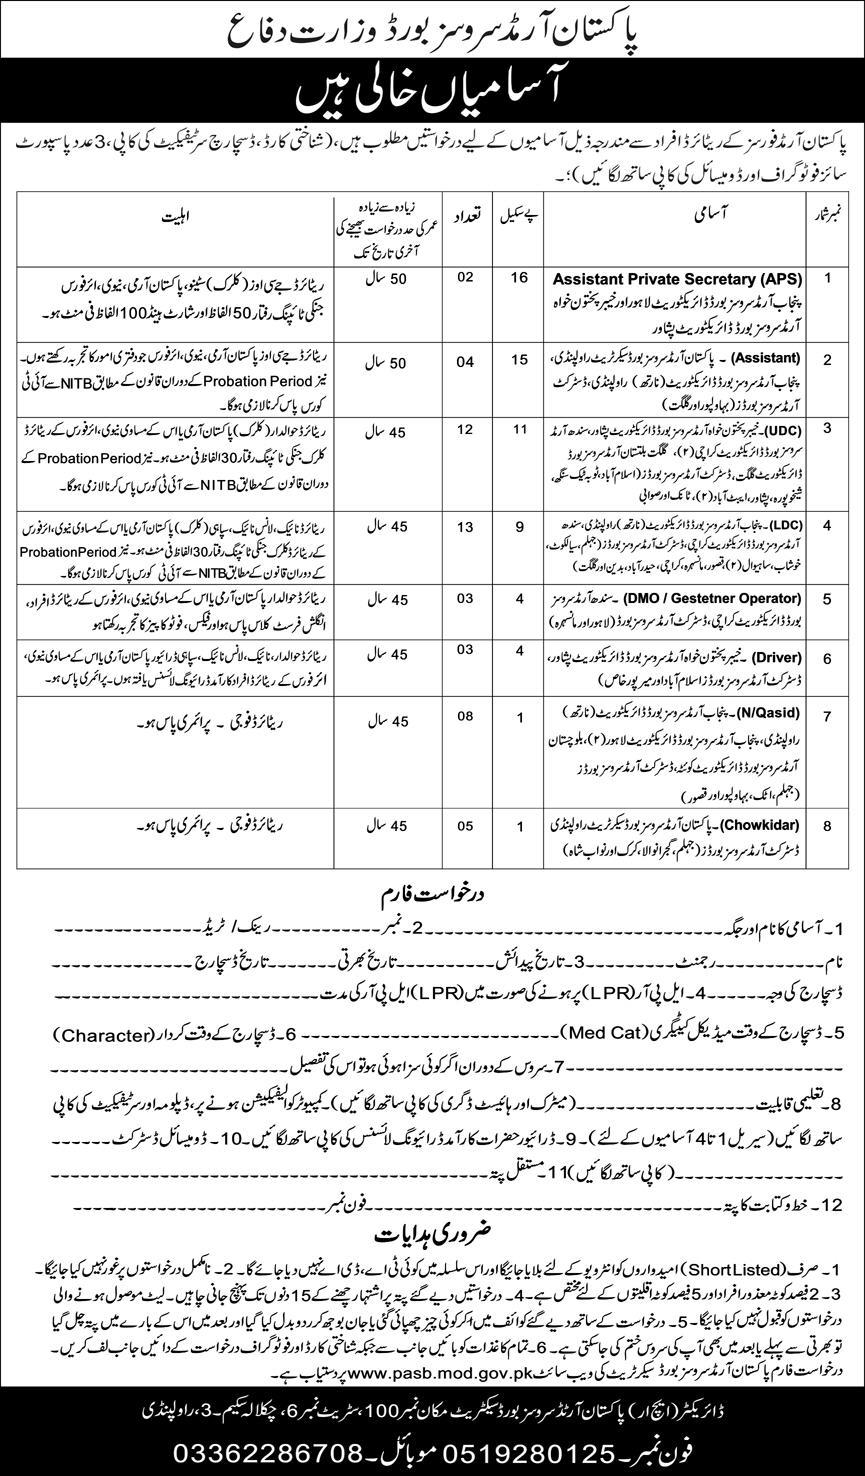 Govt Jobs Pakistan Today 2022 At Pakistan Armed Services Board